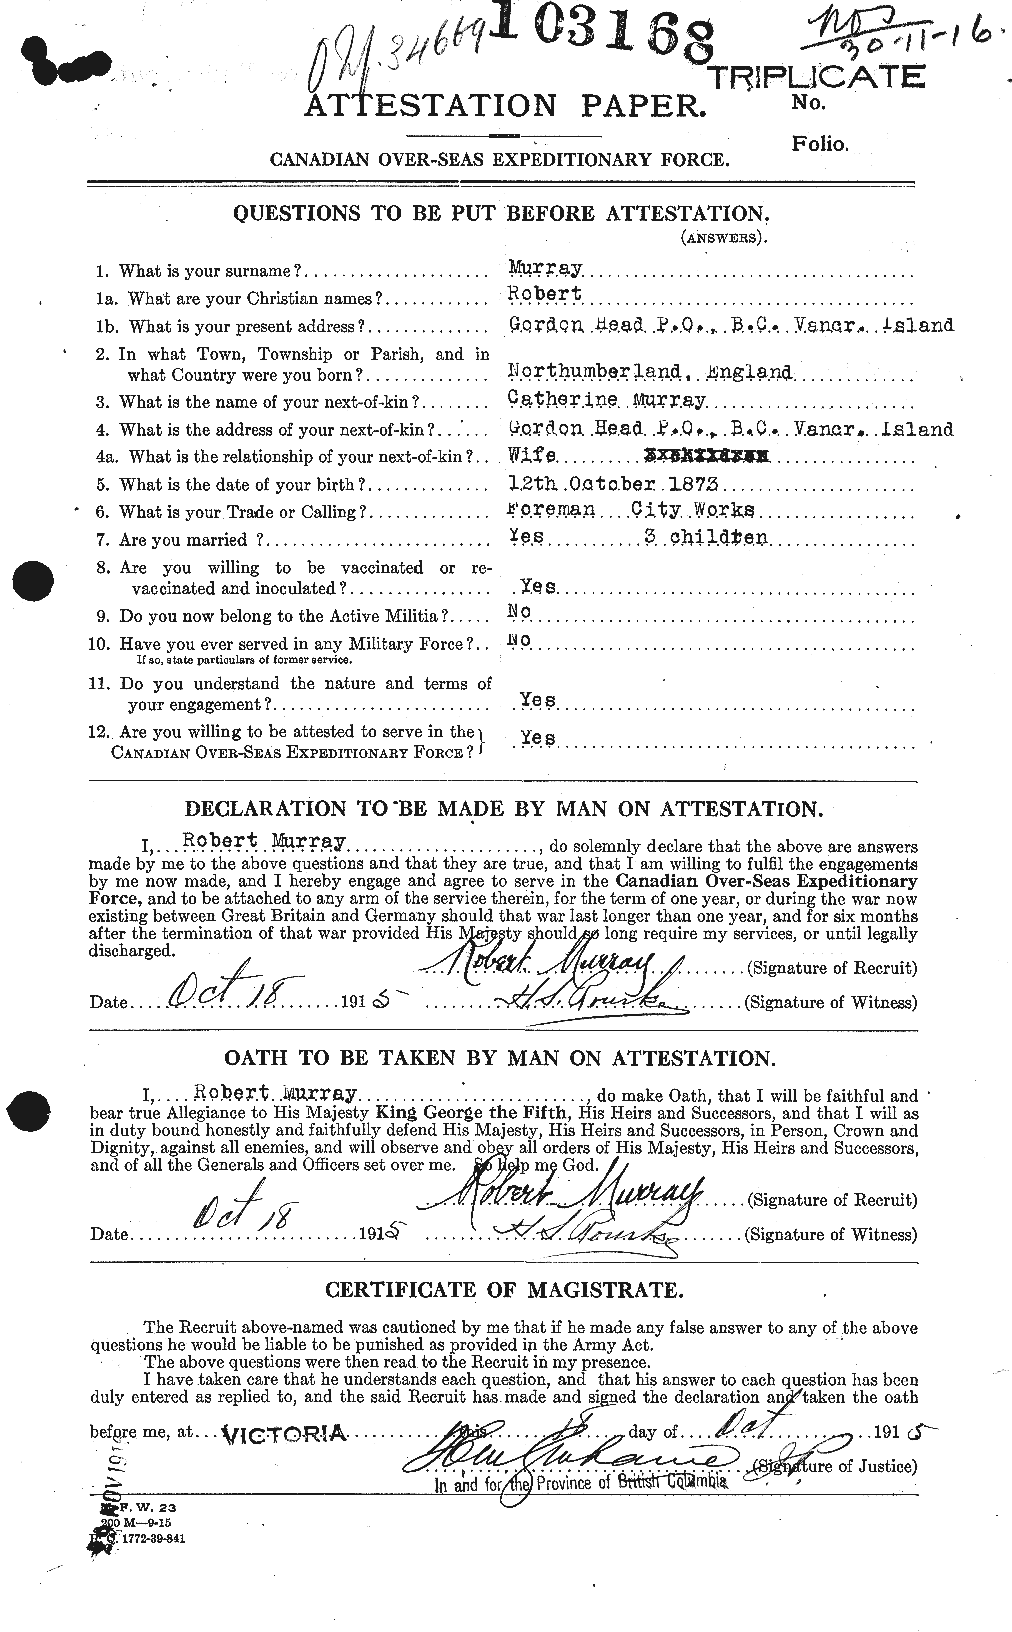 Personnel Records of the First World War - CEF 514043a